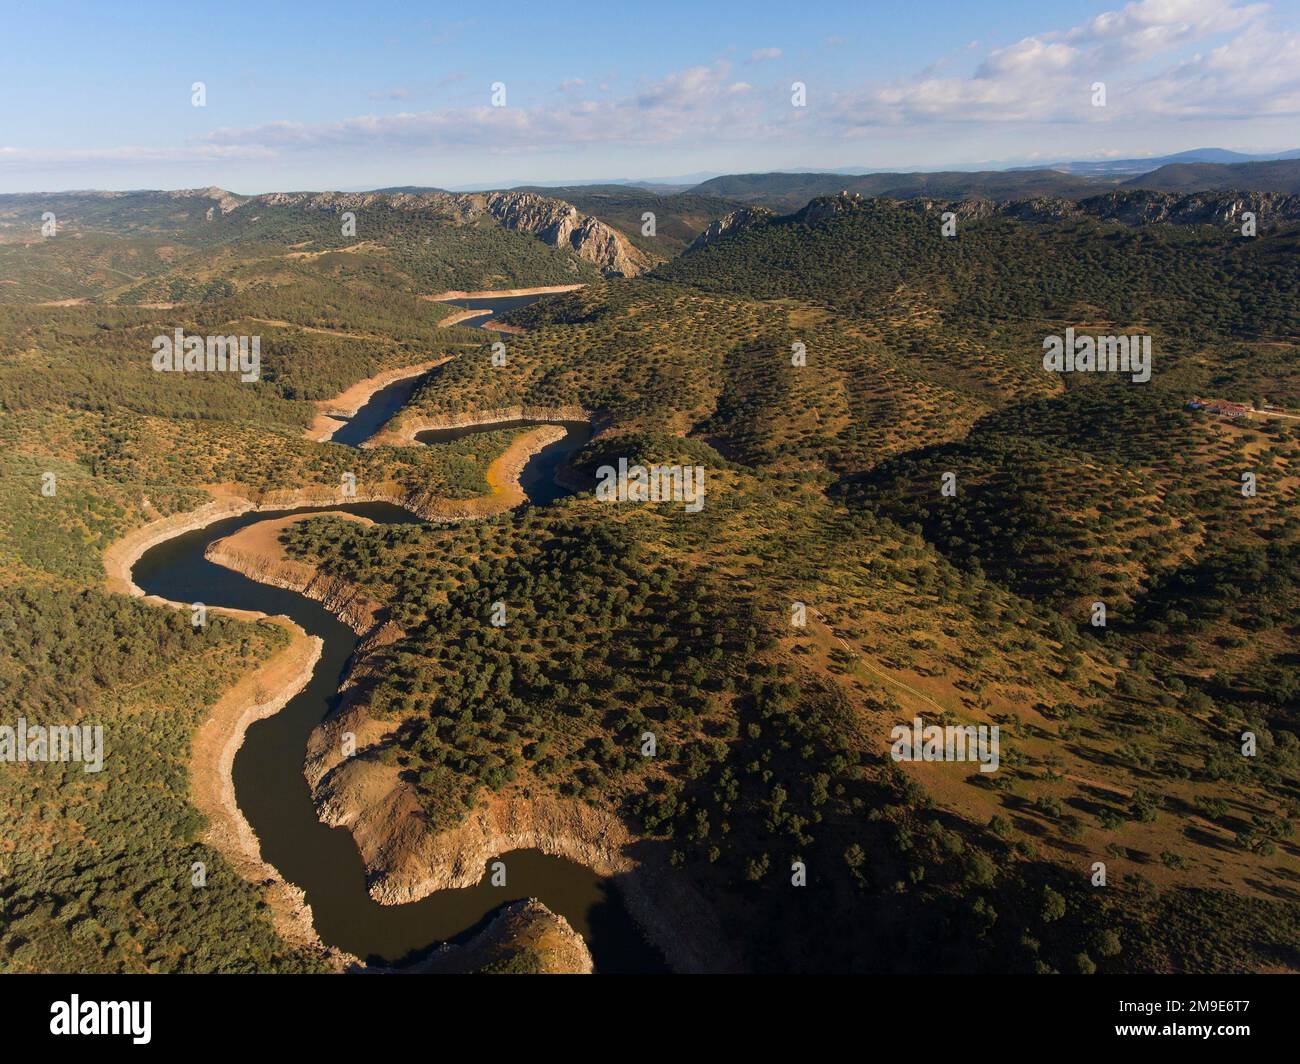 Dehesa, holm oak forest with river, aerial view, Monfraguee National Park, Extremadura, Spain Stock Photo